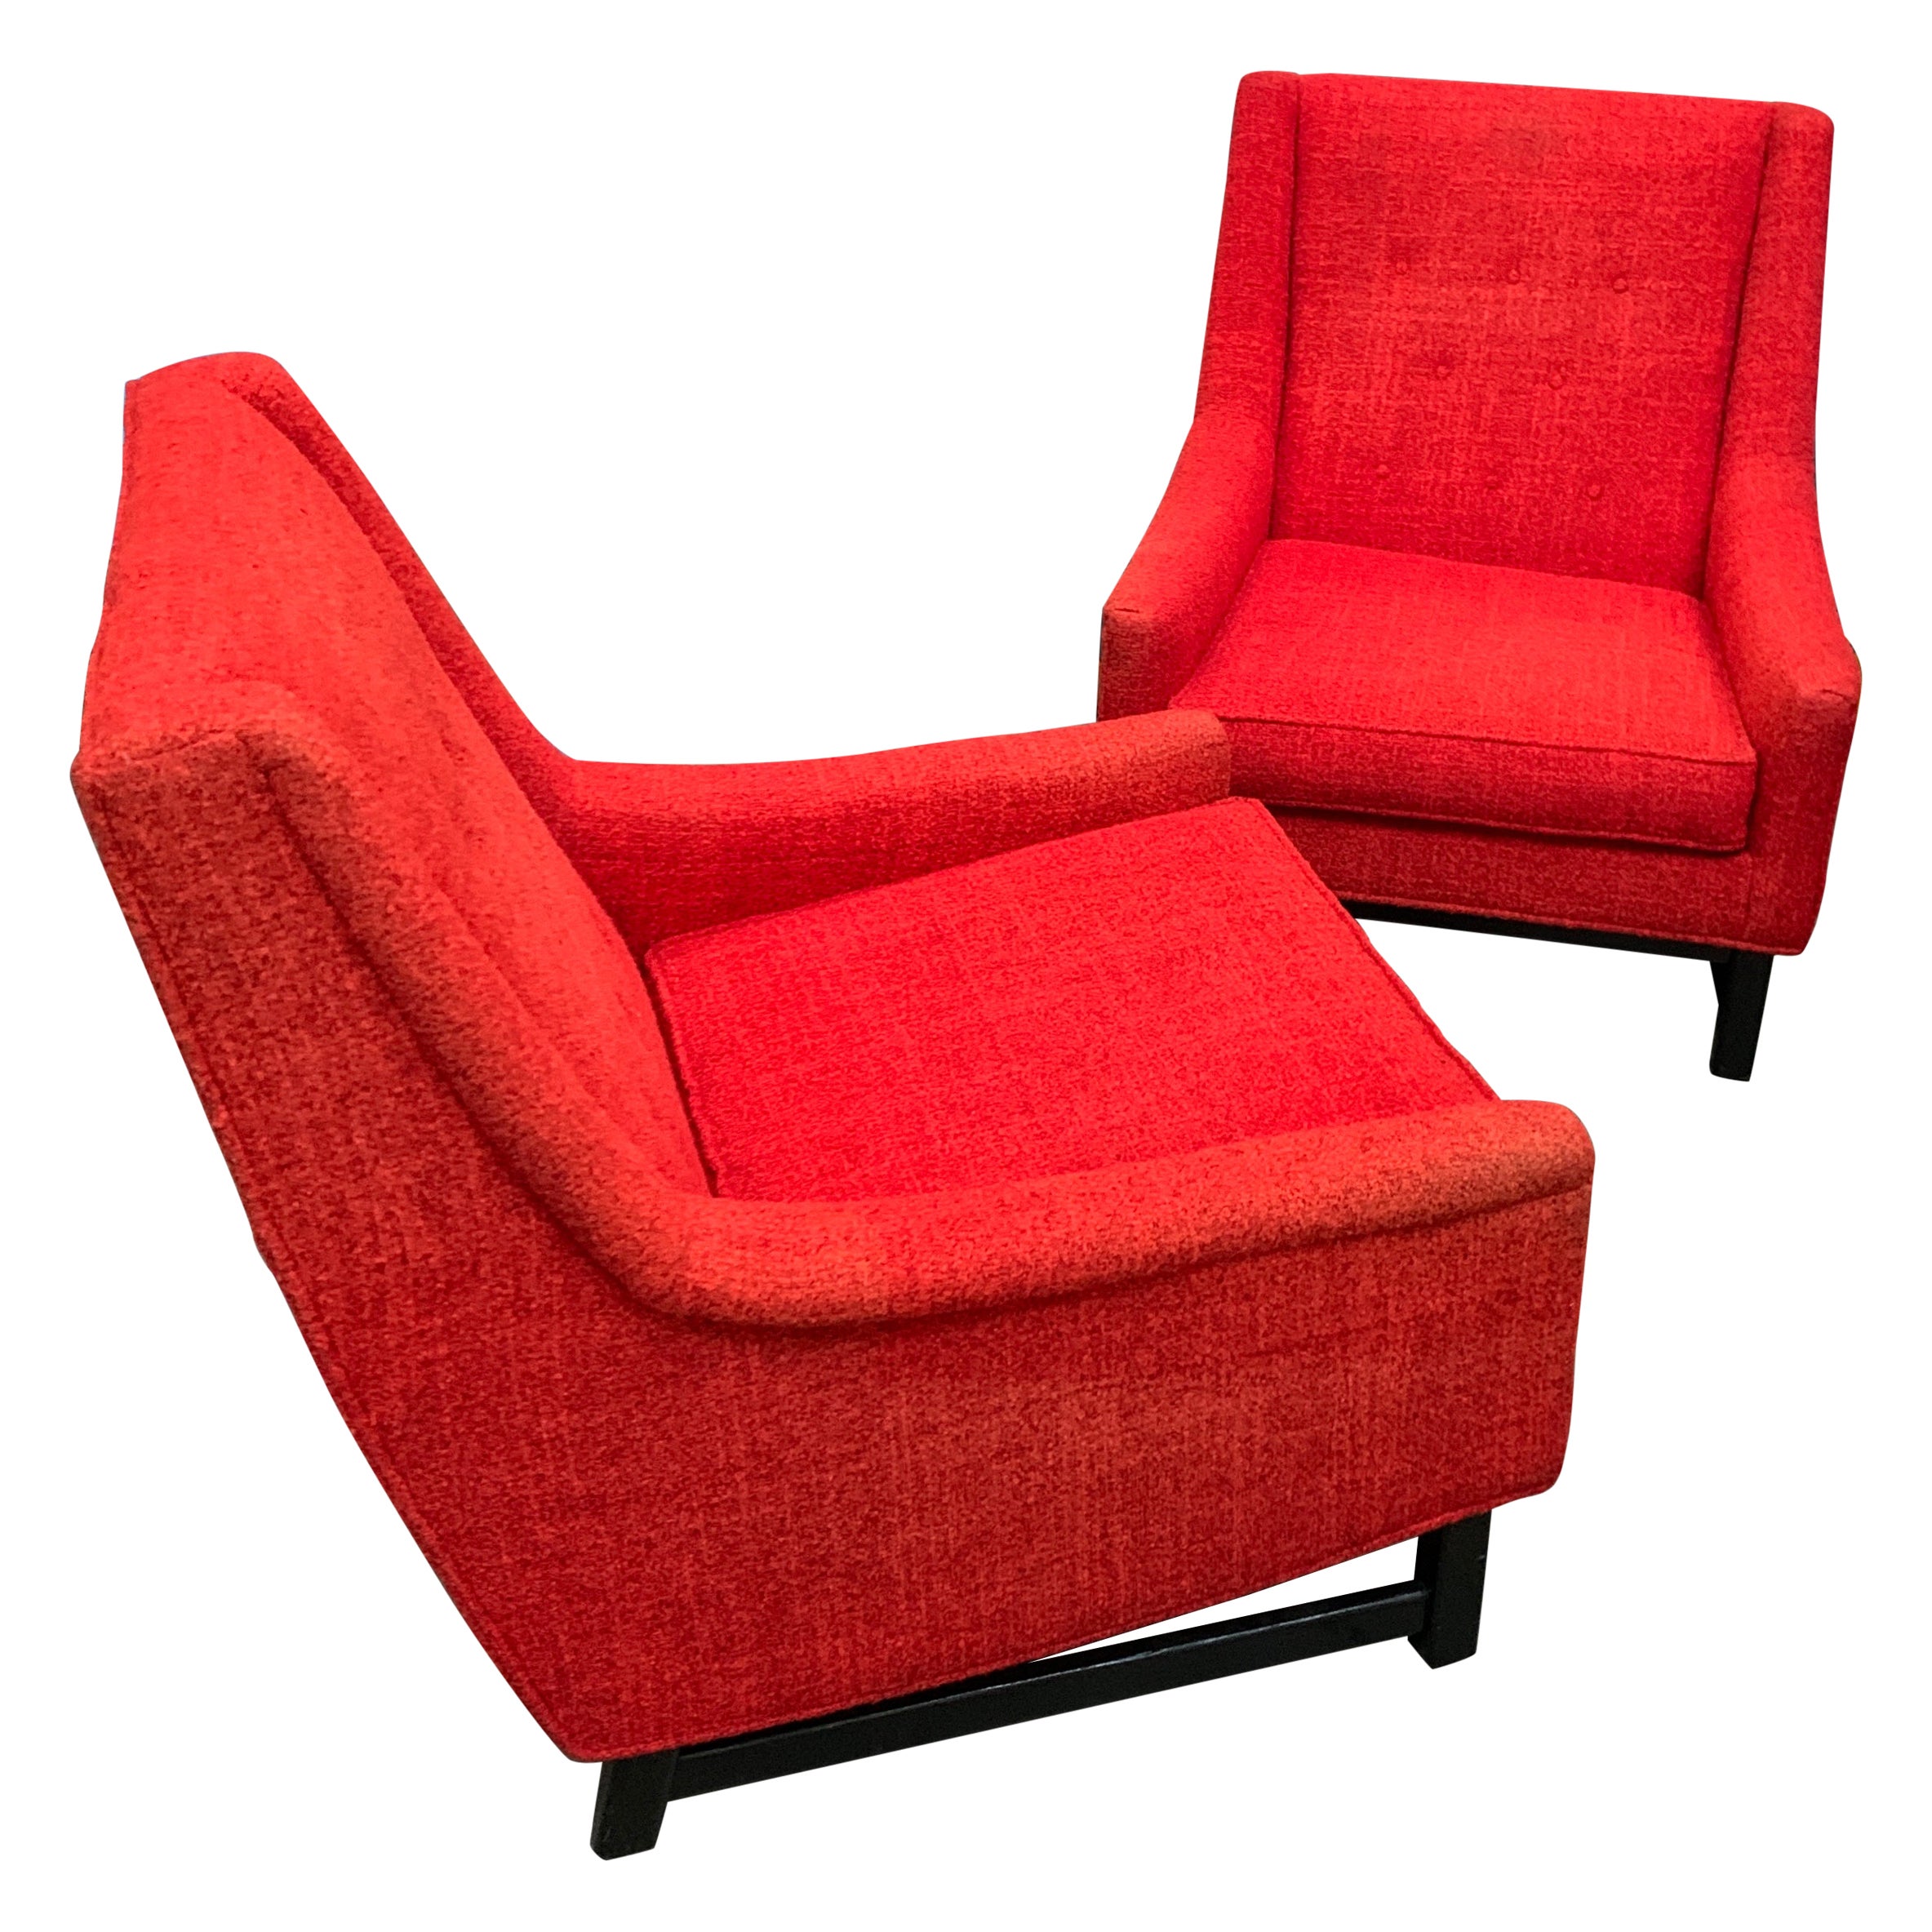 1960’s Red Lounge Chairs